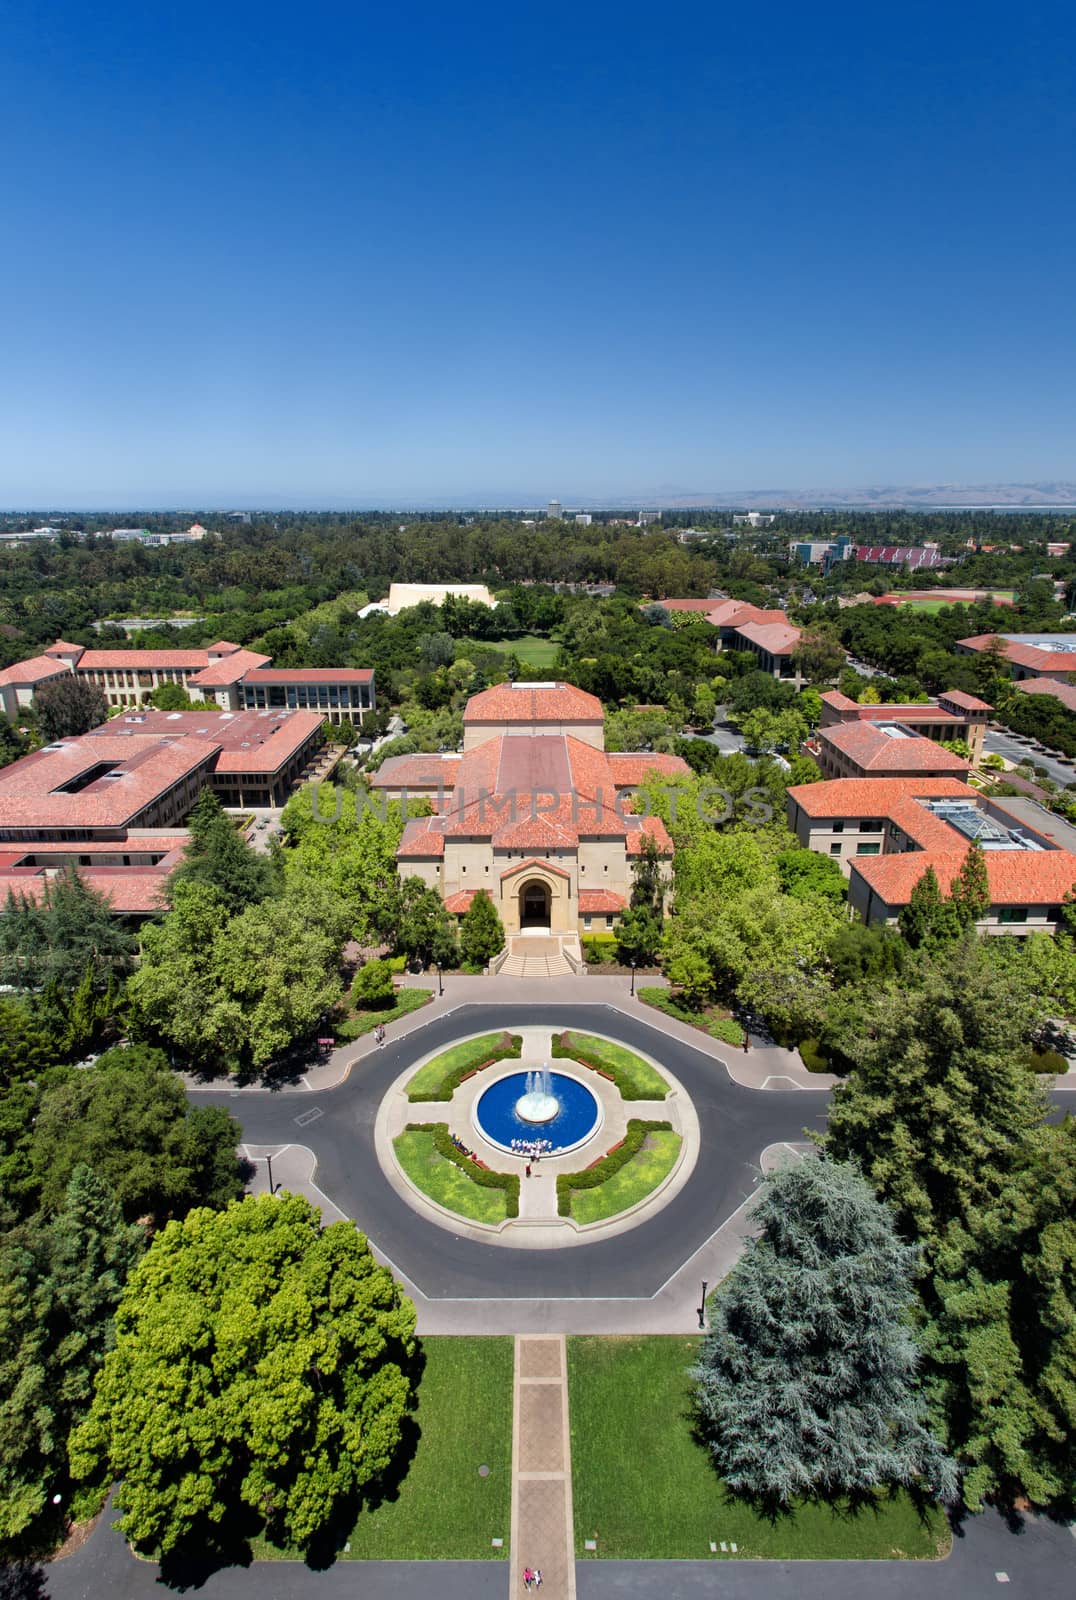 Overhead View of Stanford University by wolterk